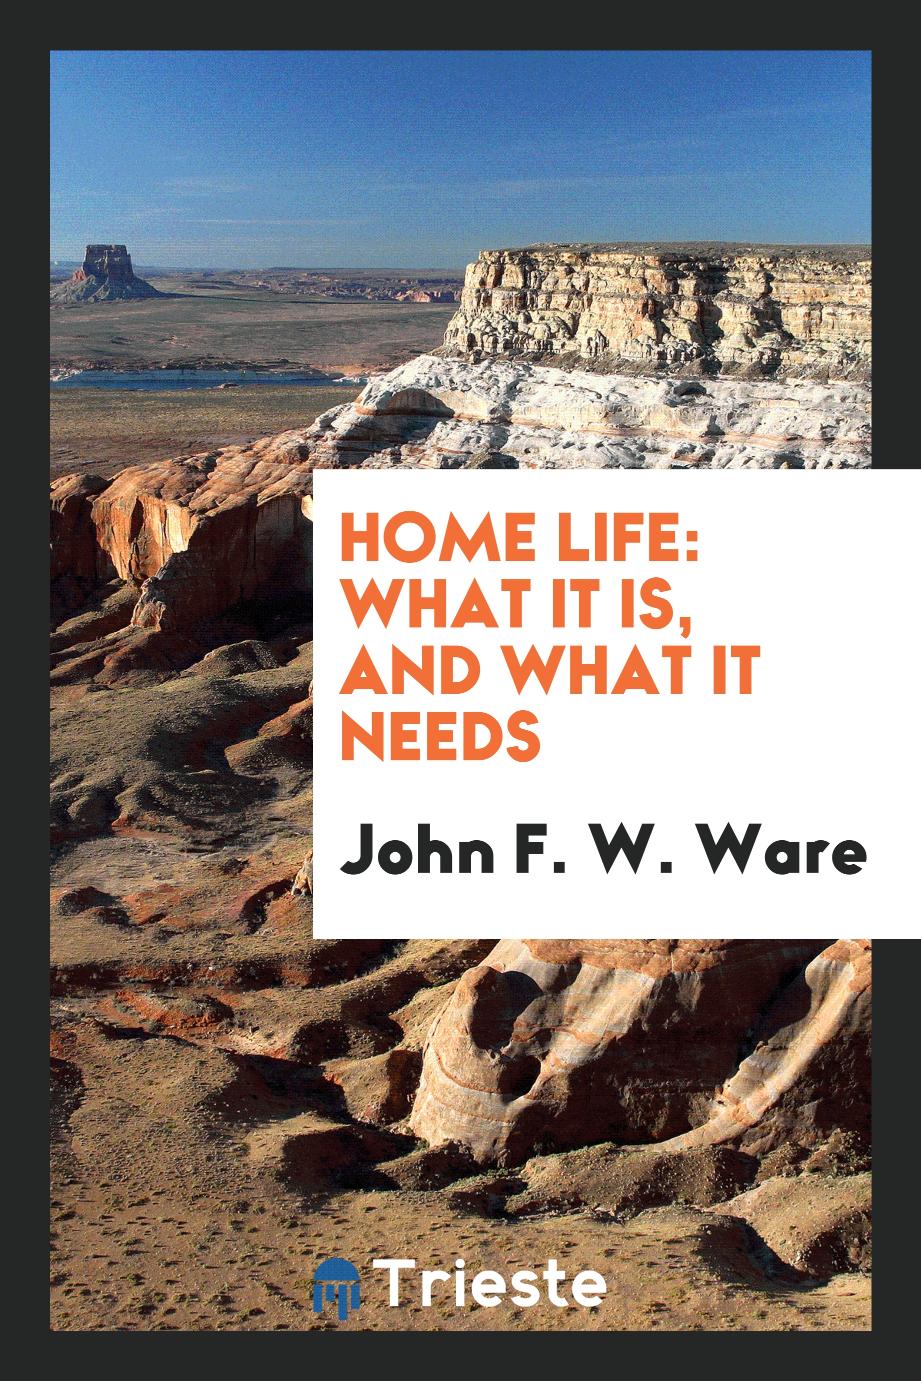 Home Life: What It Is, and What It Needs